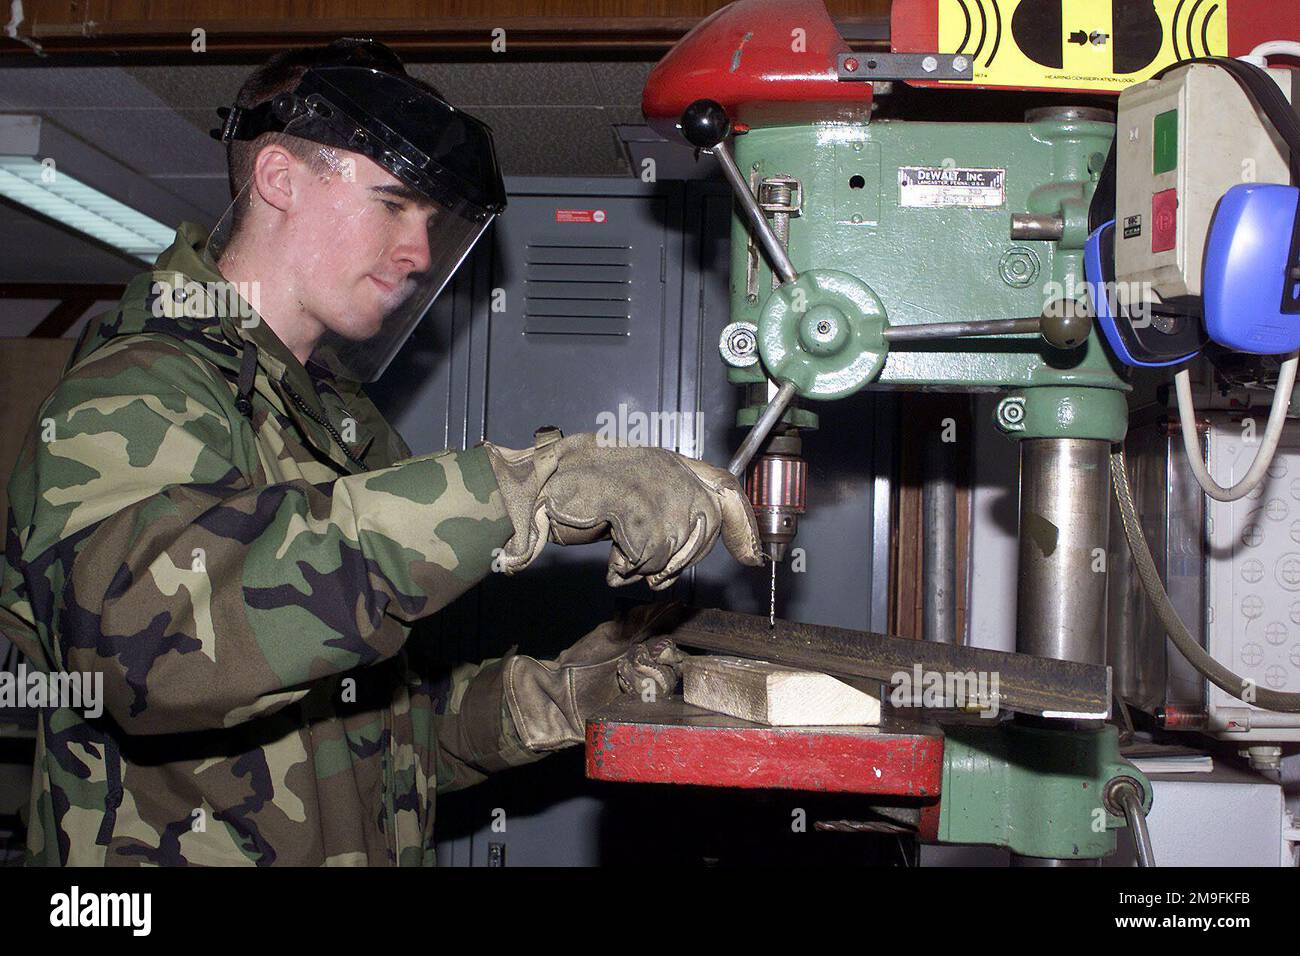 US Air Force AIRMAN Justin Adney, 52nd Civil Engineering Squadron, drills a hole using a drill press machine to build a stand for a gas burner at Spangdahlem Air Base, Germany. Base: Spangdahlem Air Base State: Rheinland-Pfalz Country: Deutschland / Germany (DEU) Stock Photo